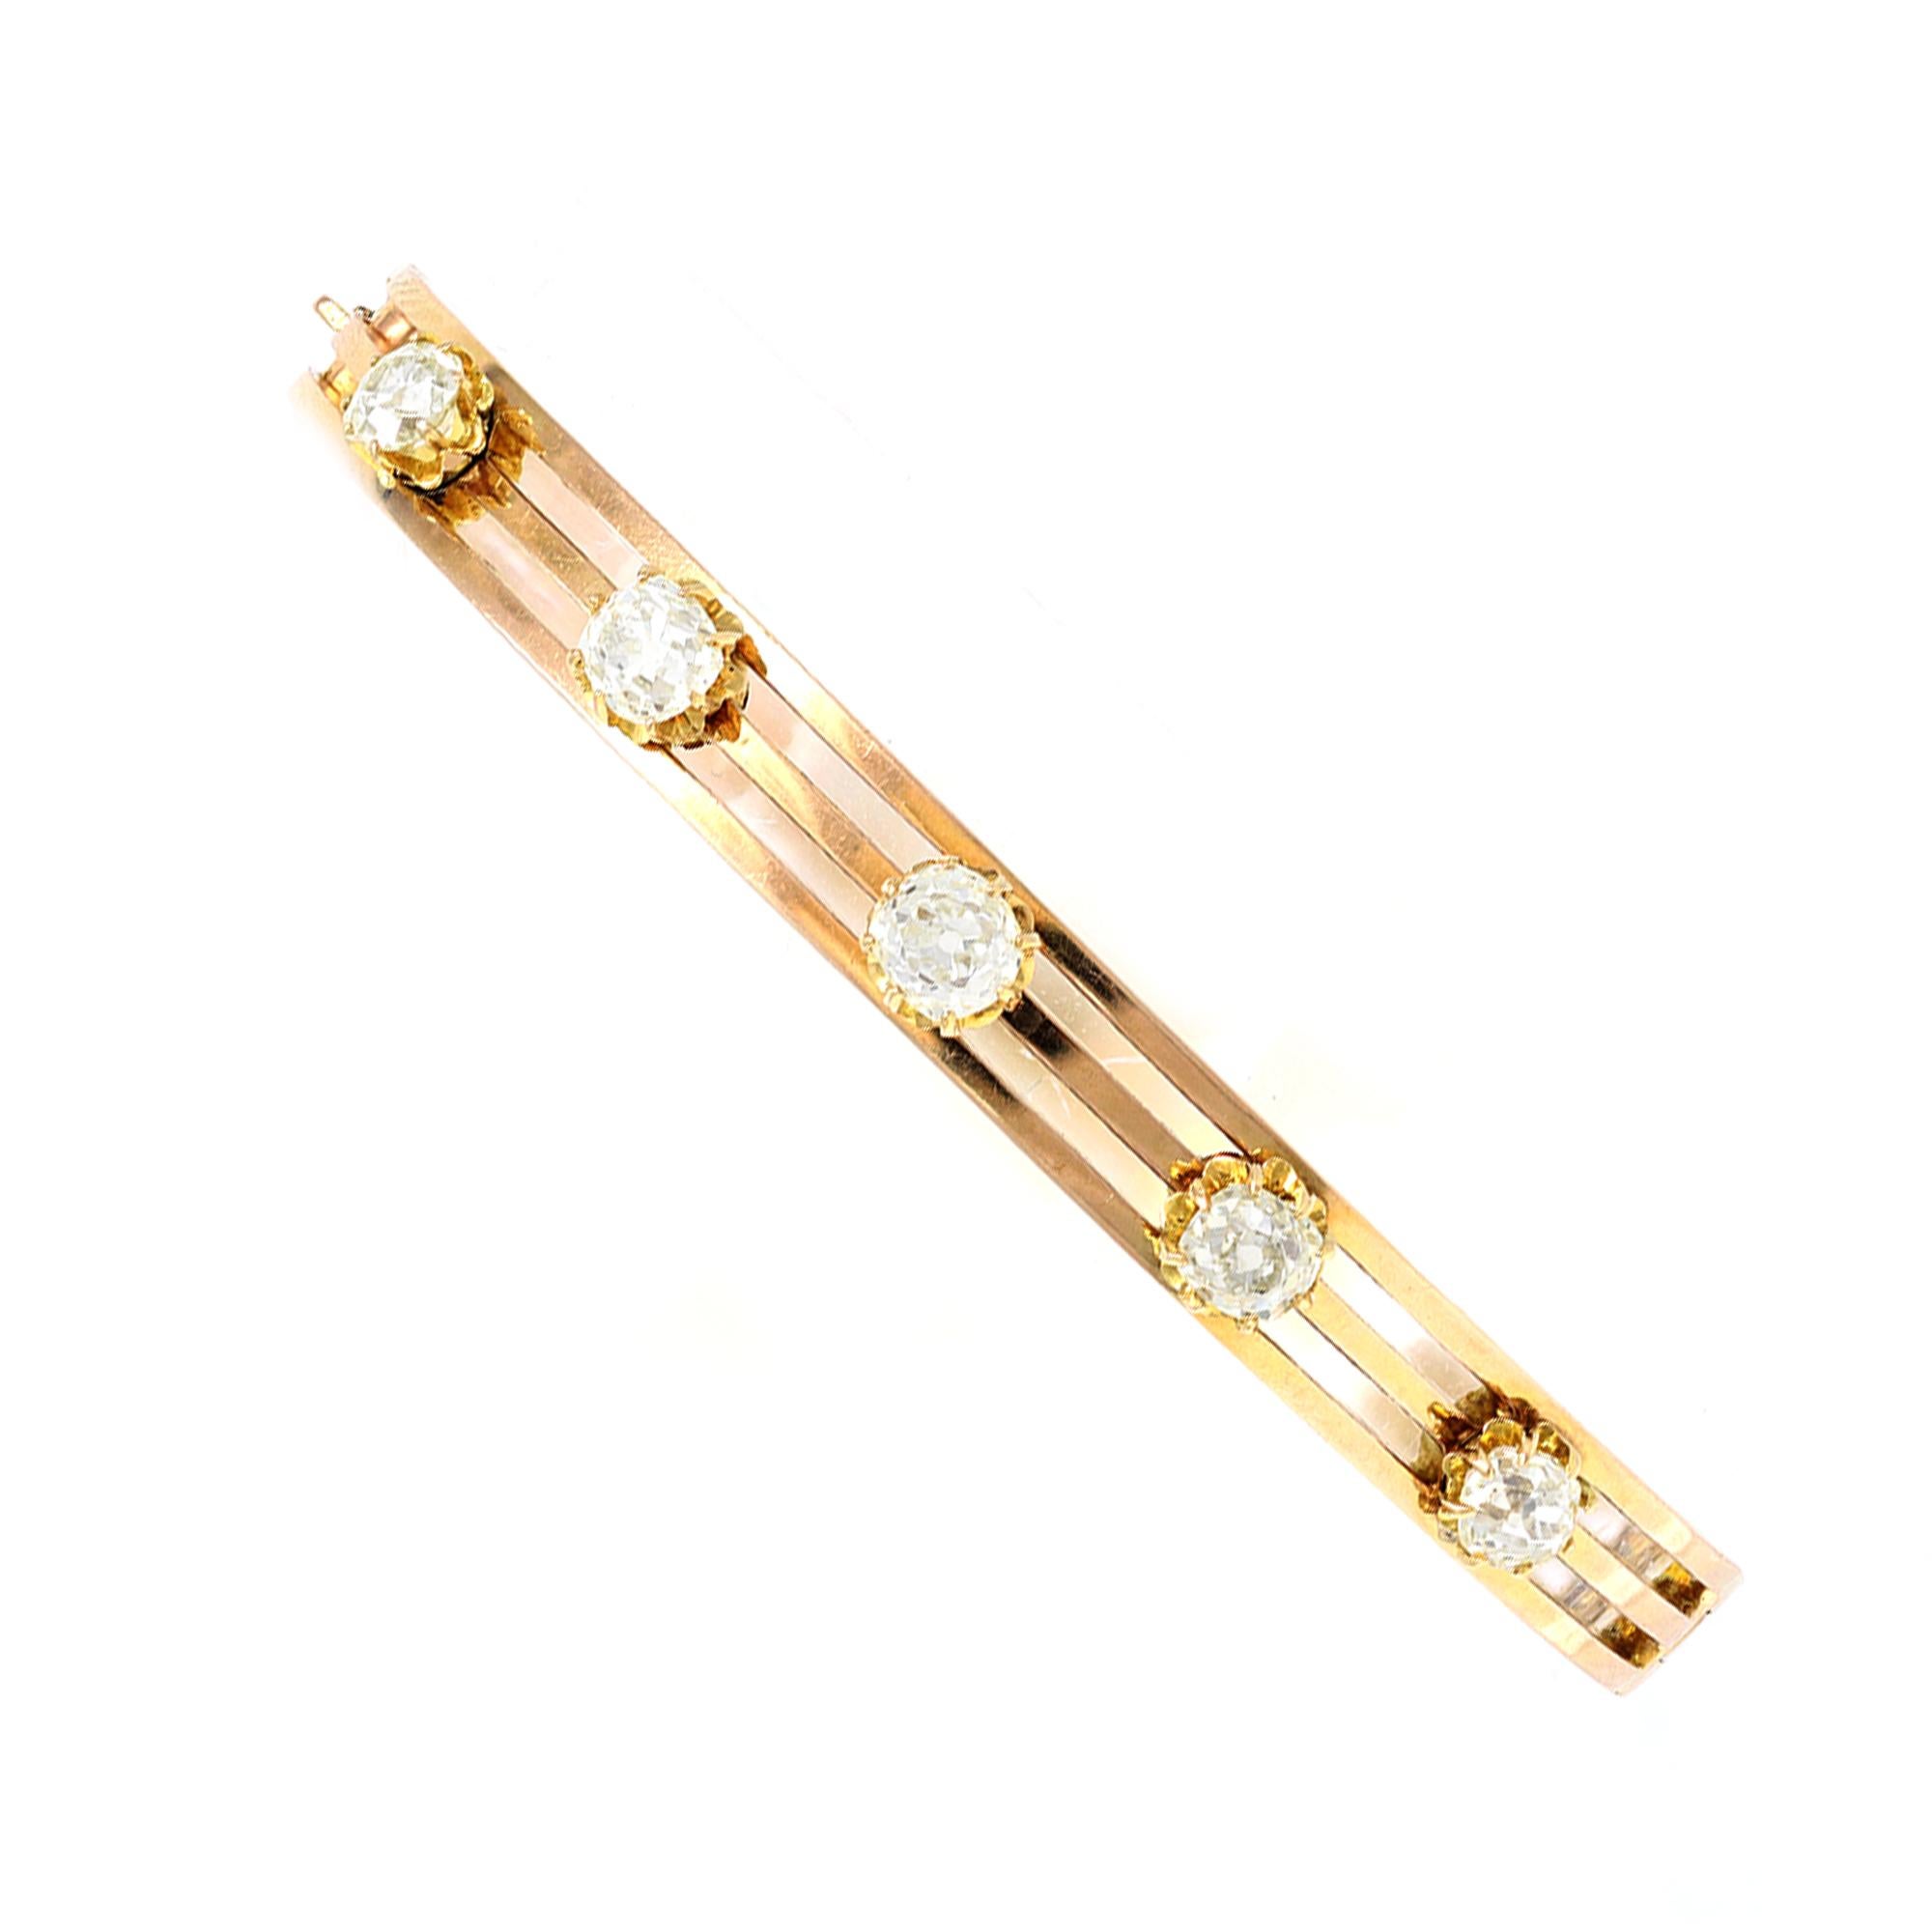 A French Belle Époque bangle Diamond bracelet set in 18K gold from the late 19th century early 20th century. Featuring five old mine cut Diamonds with a total estimated weight of 2.30 carats, this French bracelet is set in 18K yellow gold. The